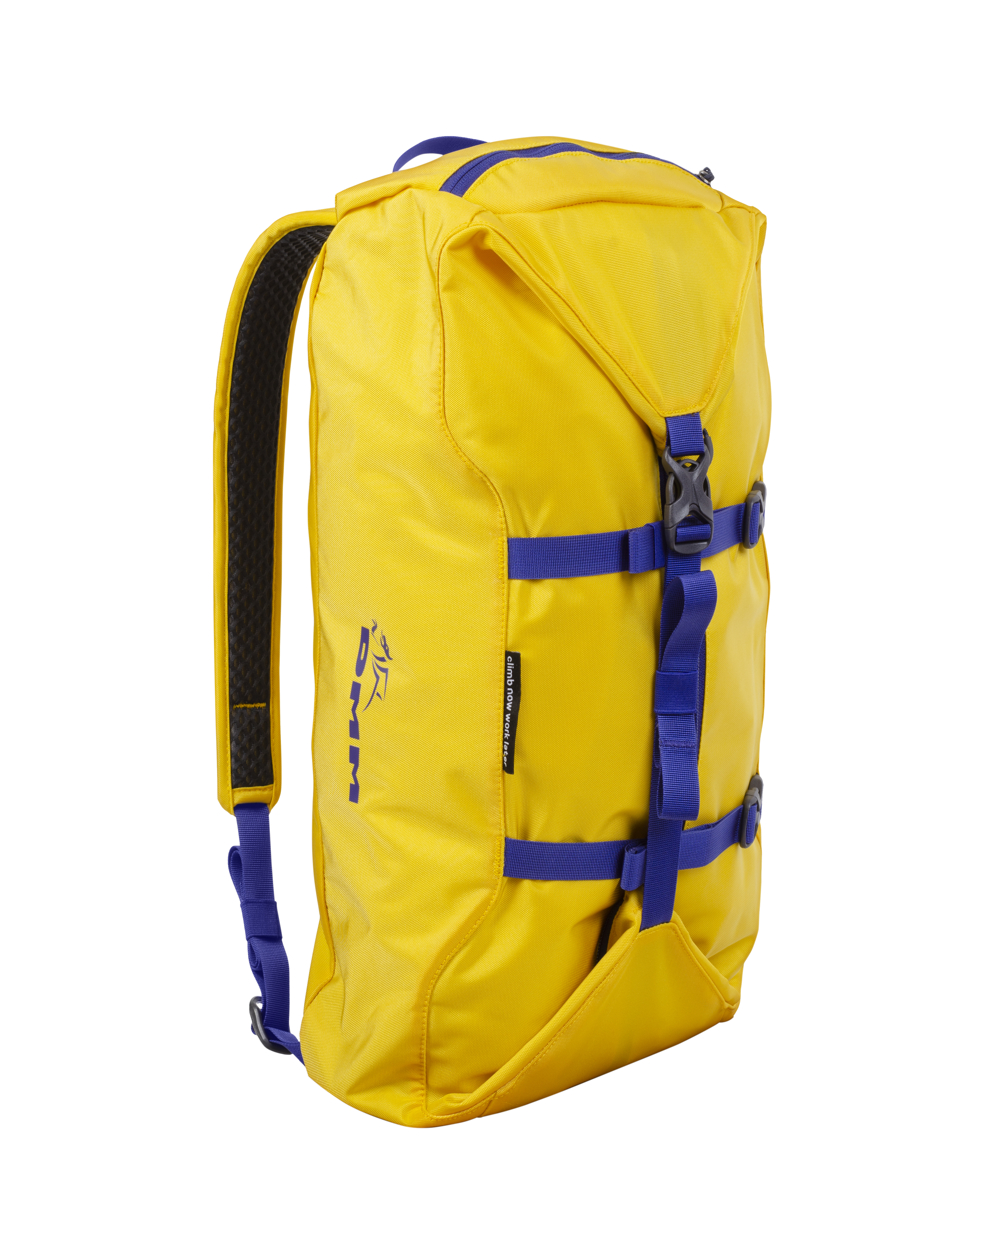 DMM Classic Rope Bag , Yellow